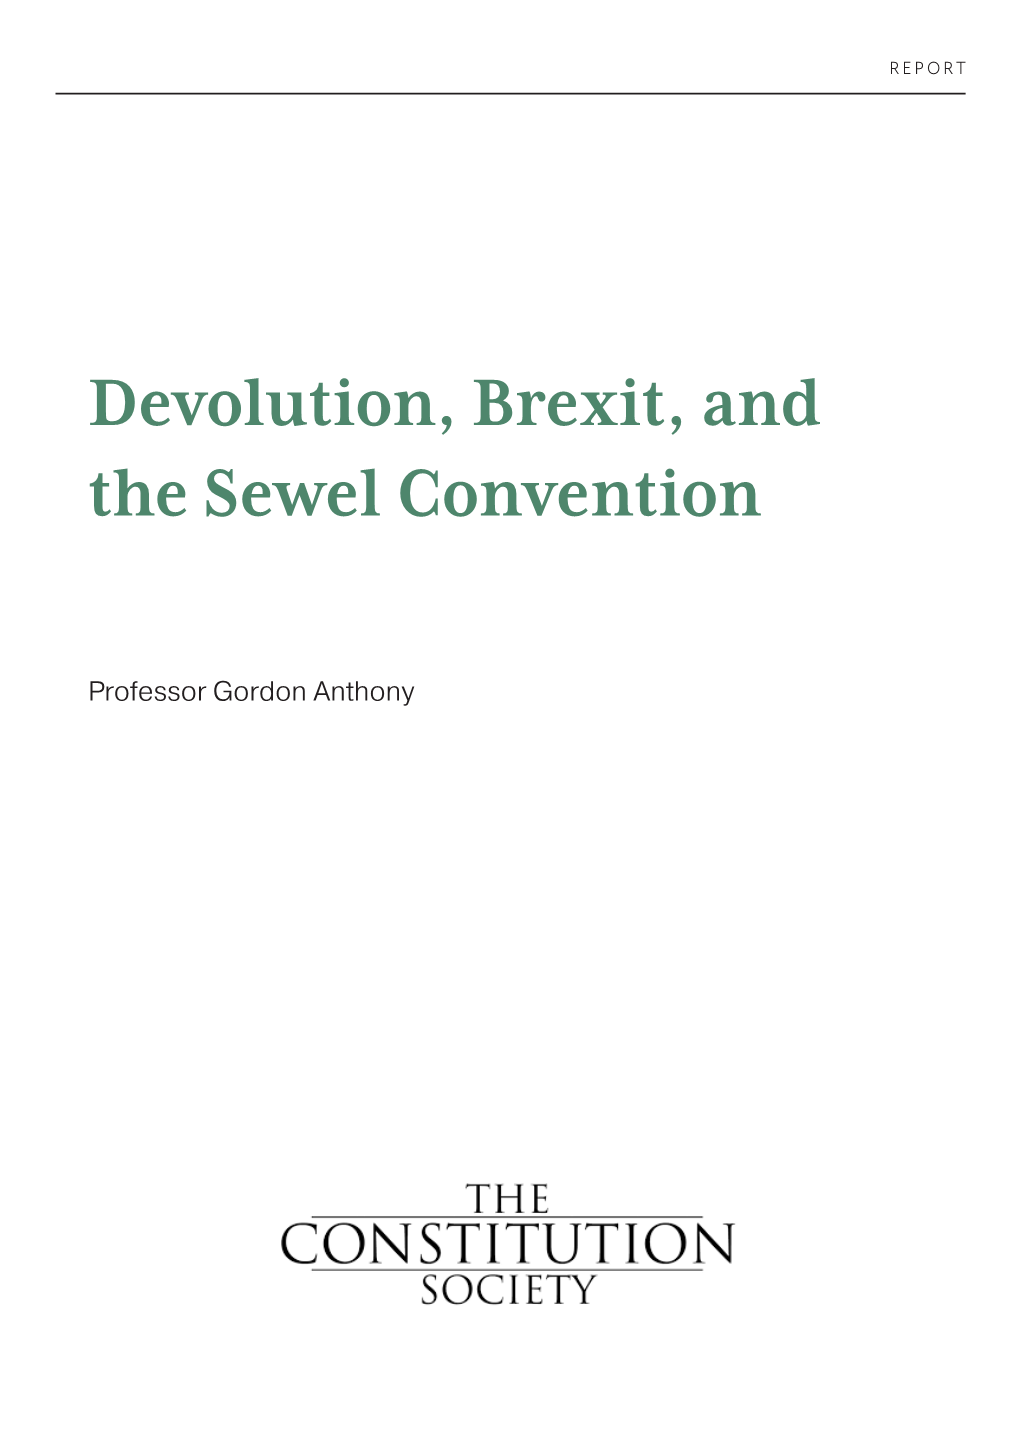 Devolution, Brexit, and the Sewel Convention